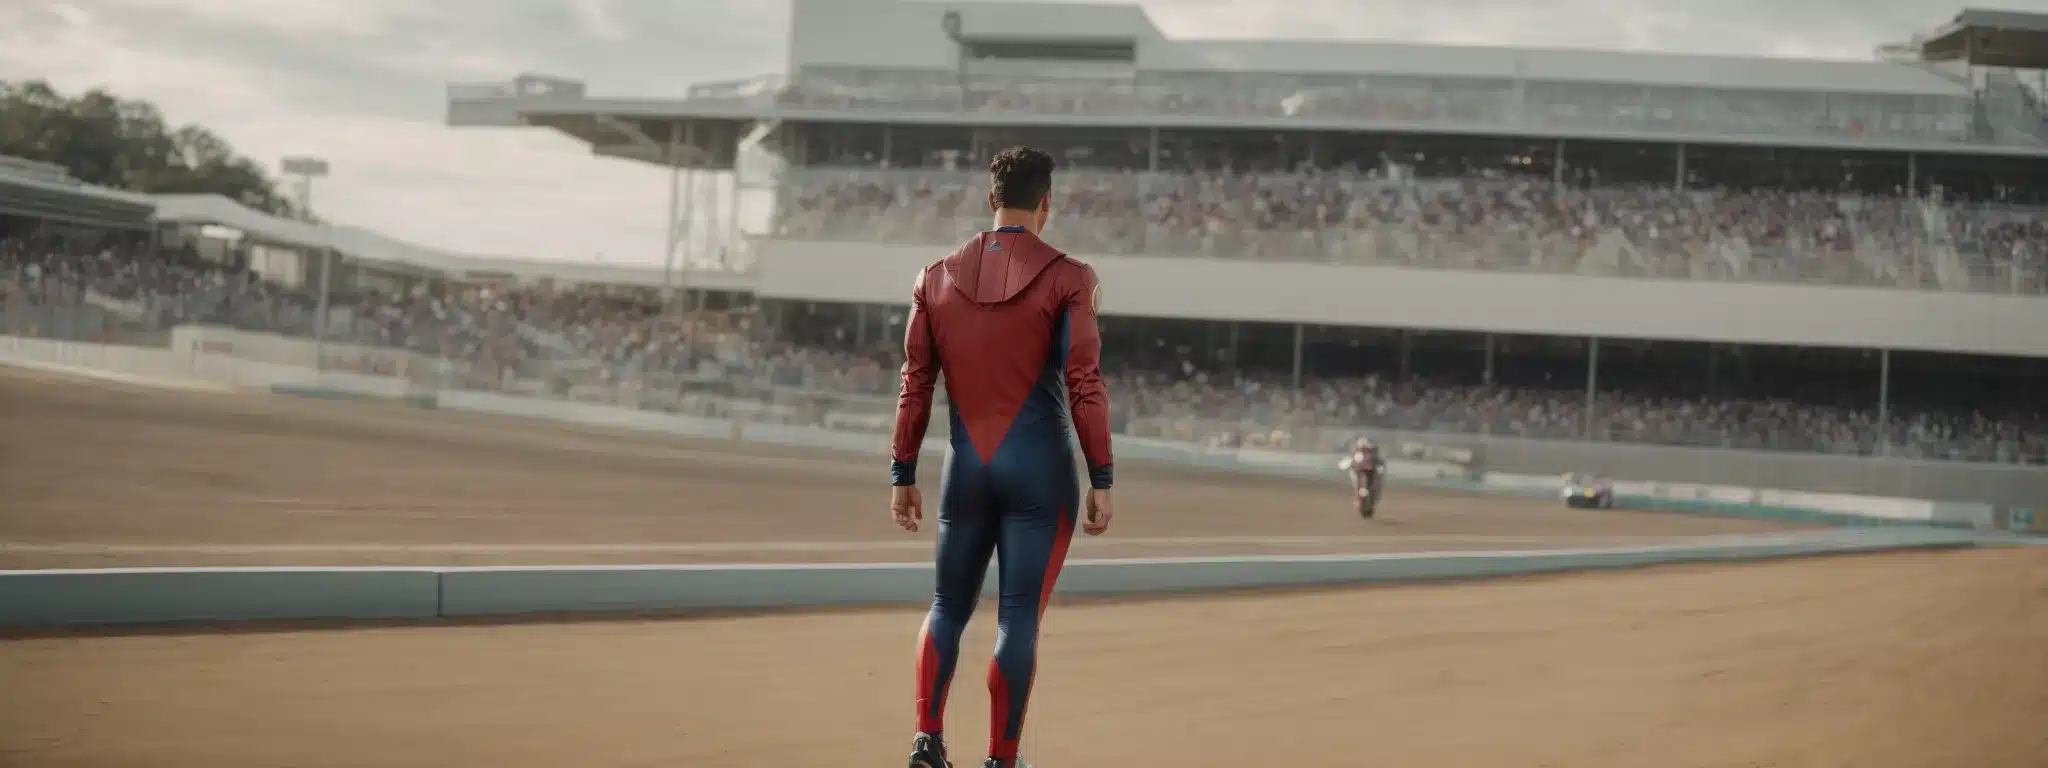 A Superhero Poised At The Starting Line Of A Racetrack, Embodying The Readiness To Accelerate Into Action.